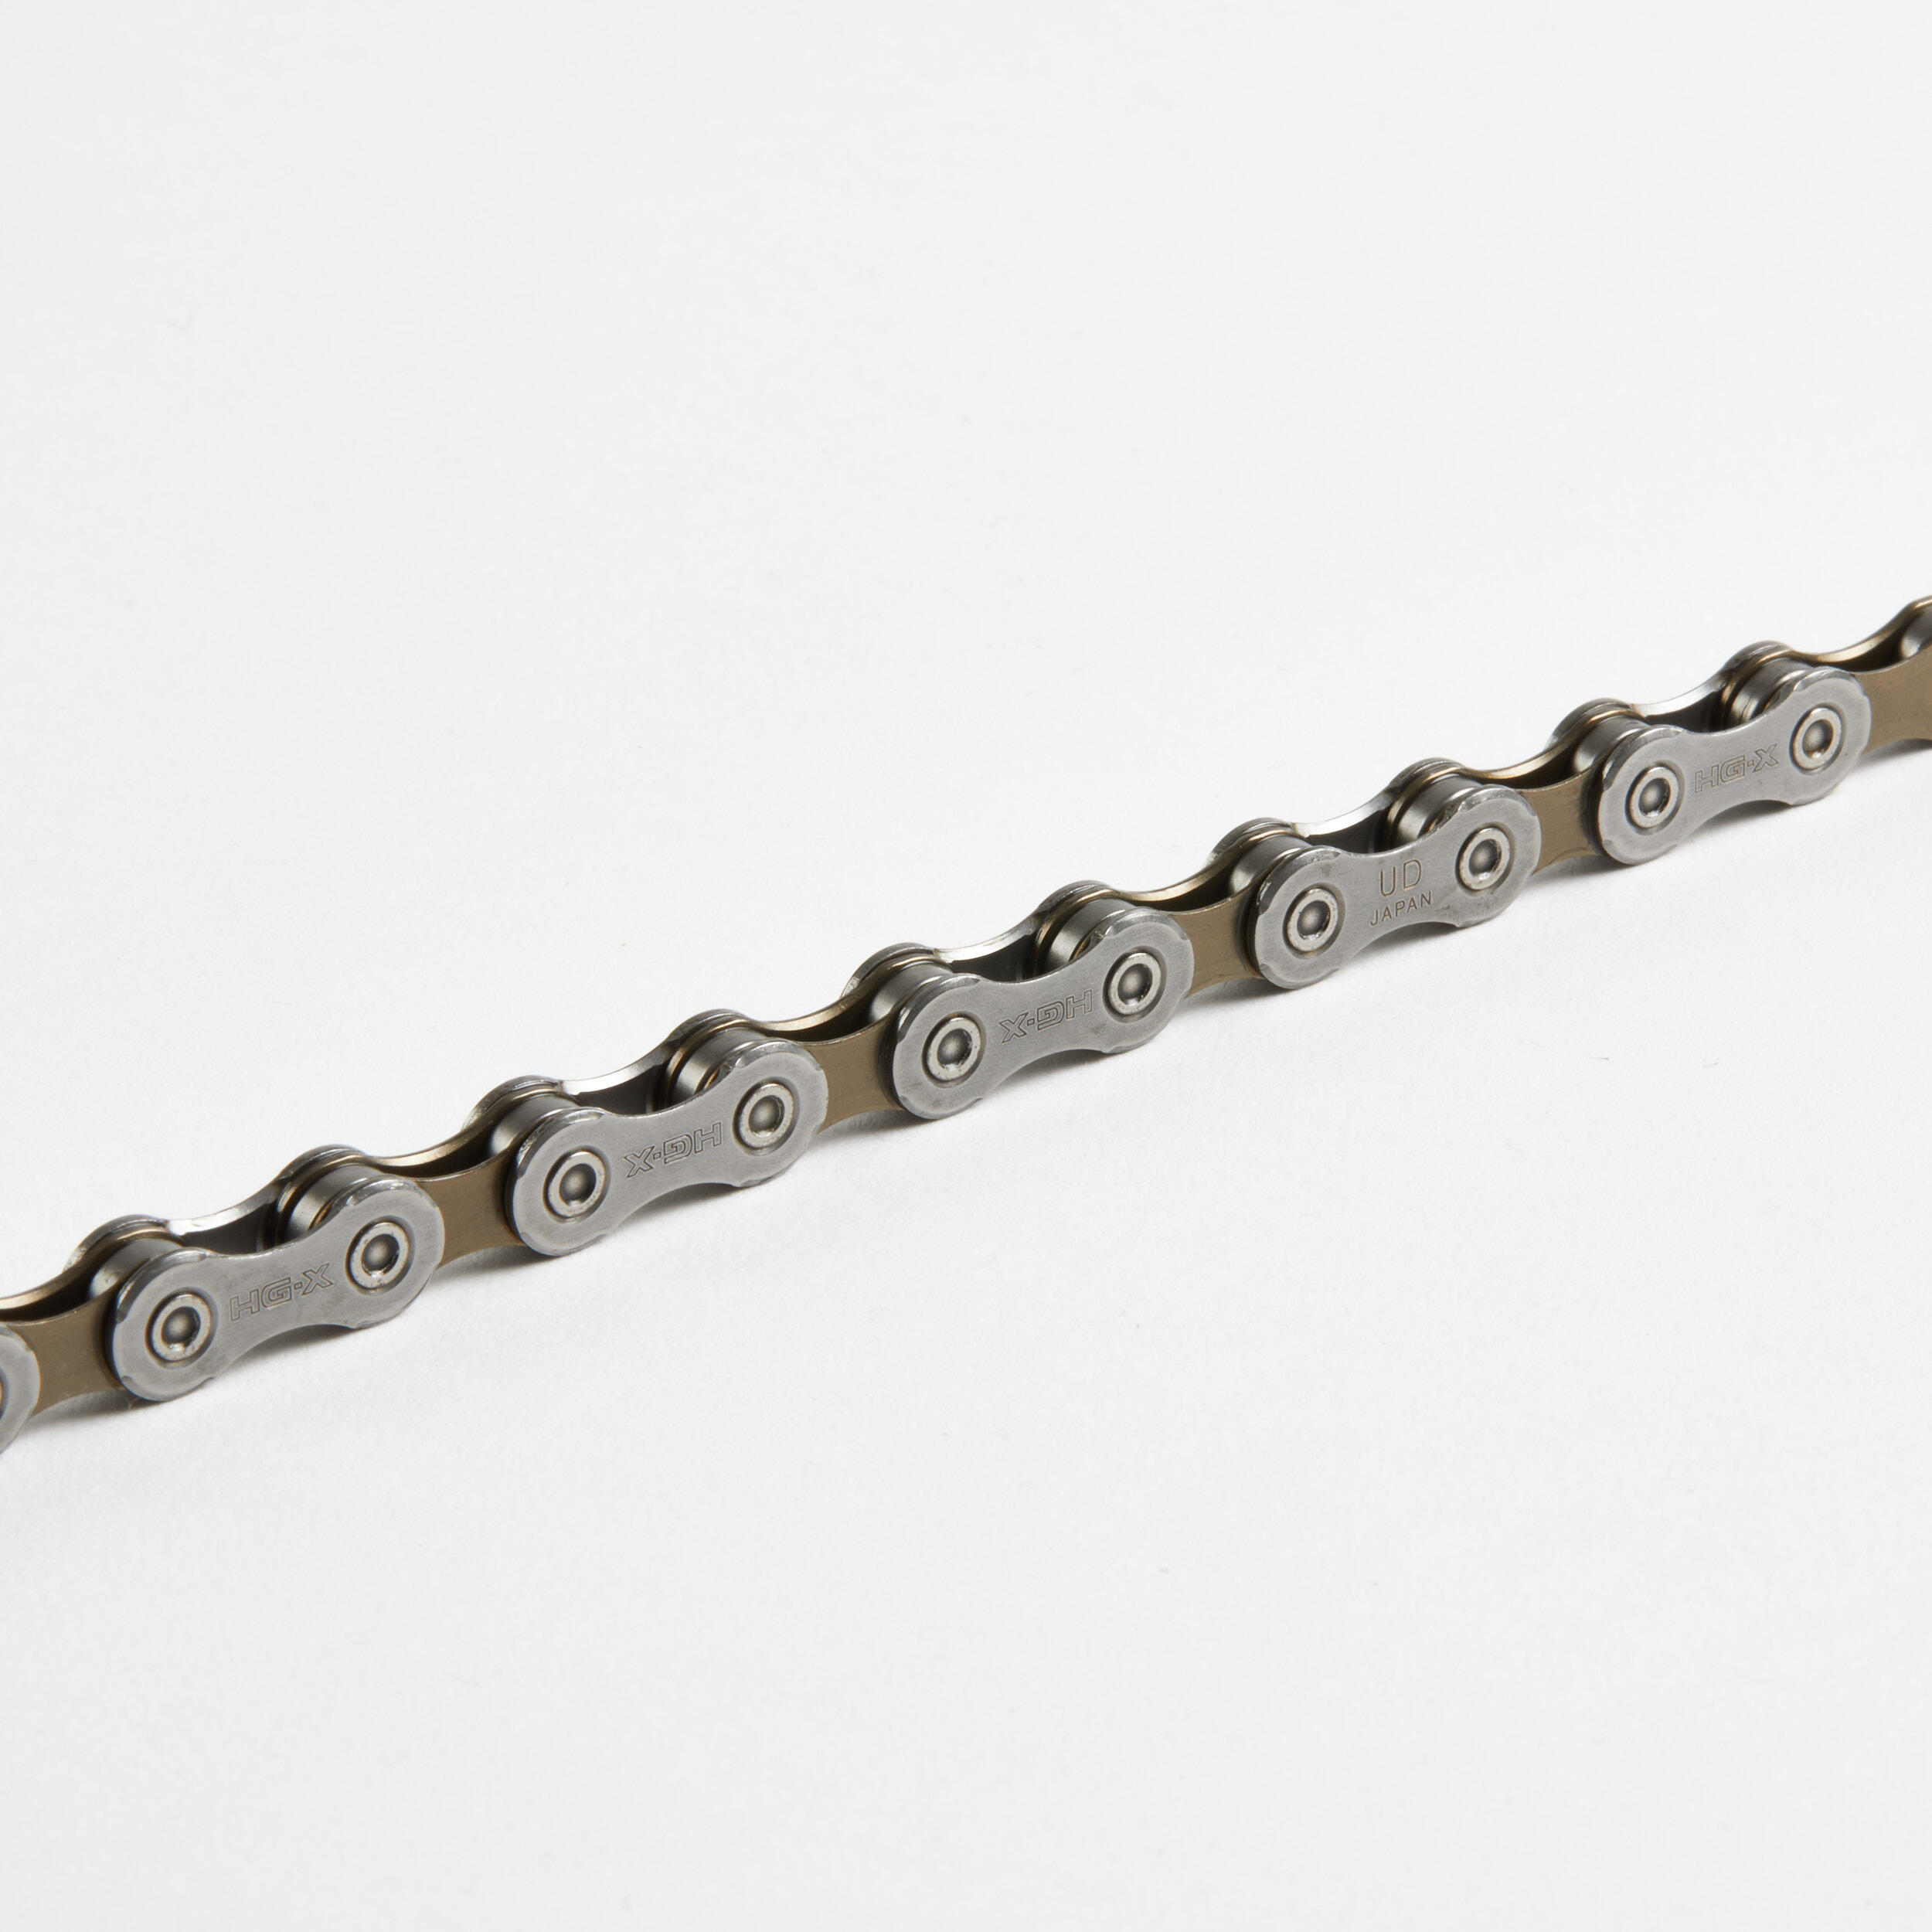 SHIMANO Deore HG54 10-Speed Chain